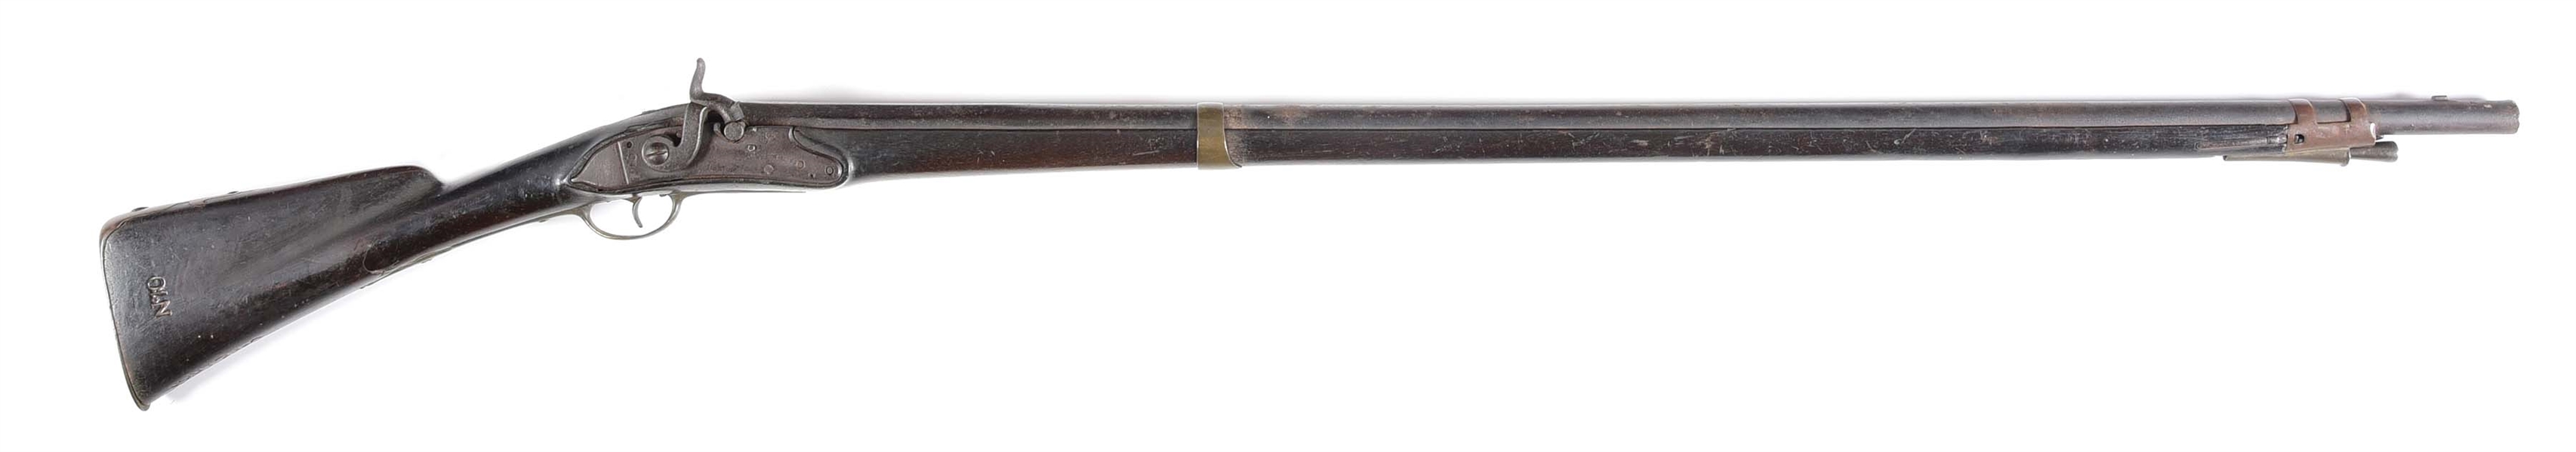 (A) REVOLUTIONARY ERA SPANISH MODEL 1757 MUSKET WITH UNIT MARKINGS.